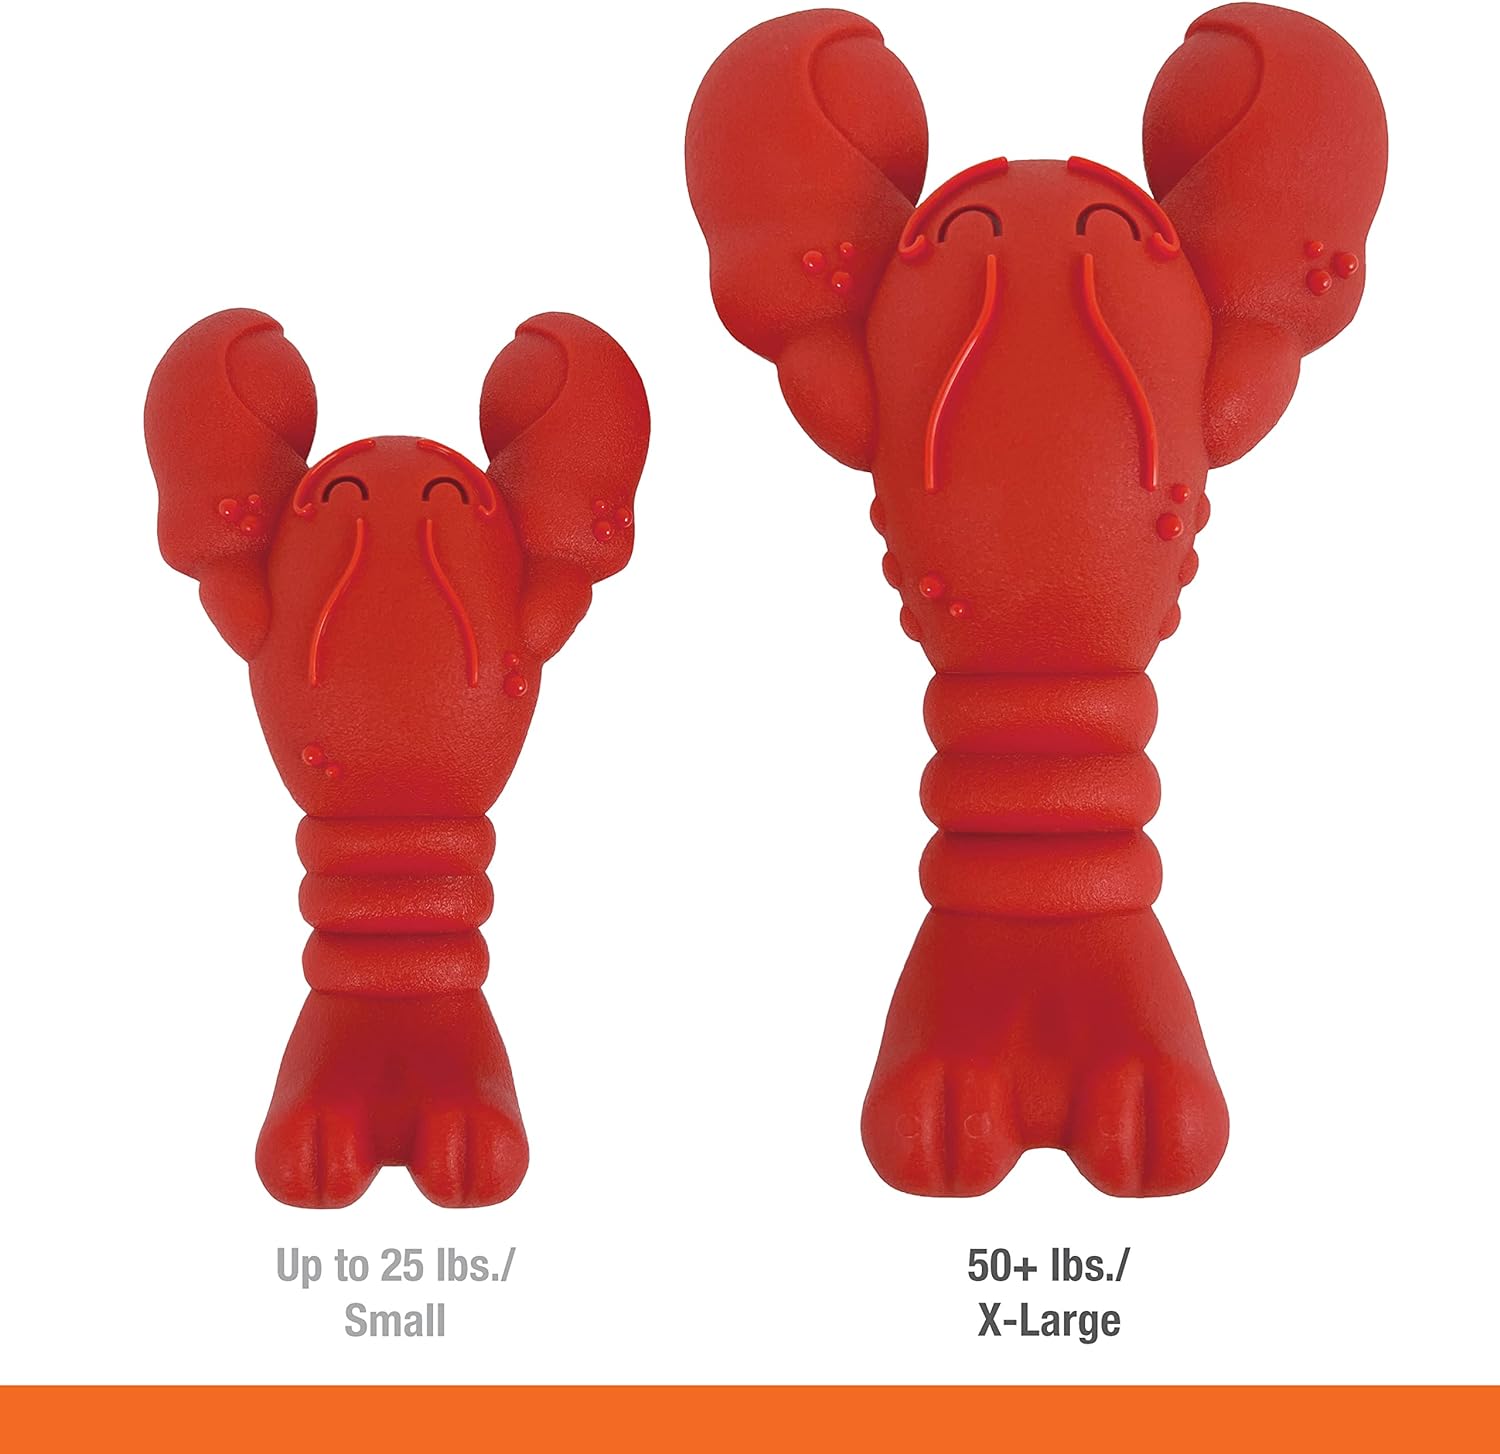 Nylabone Lobster Dog Toy Power Chew – Cute Dog Toys for Aggressive Chewers – with a Funny Twist! Filet Mignon Flavor, X-Large/Souper